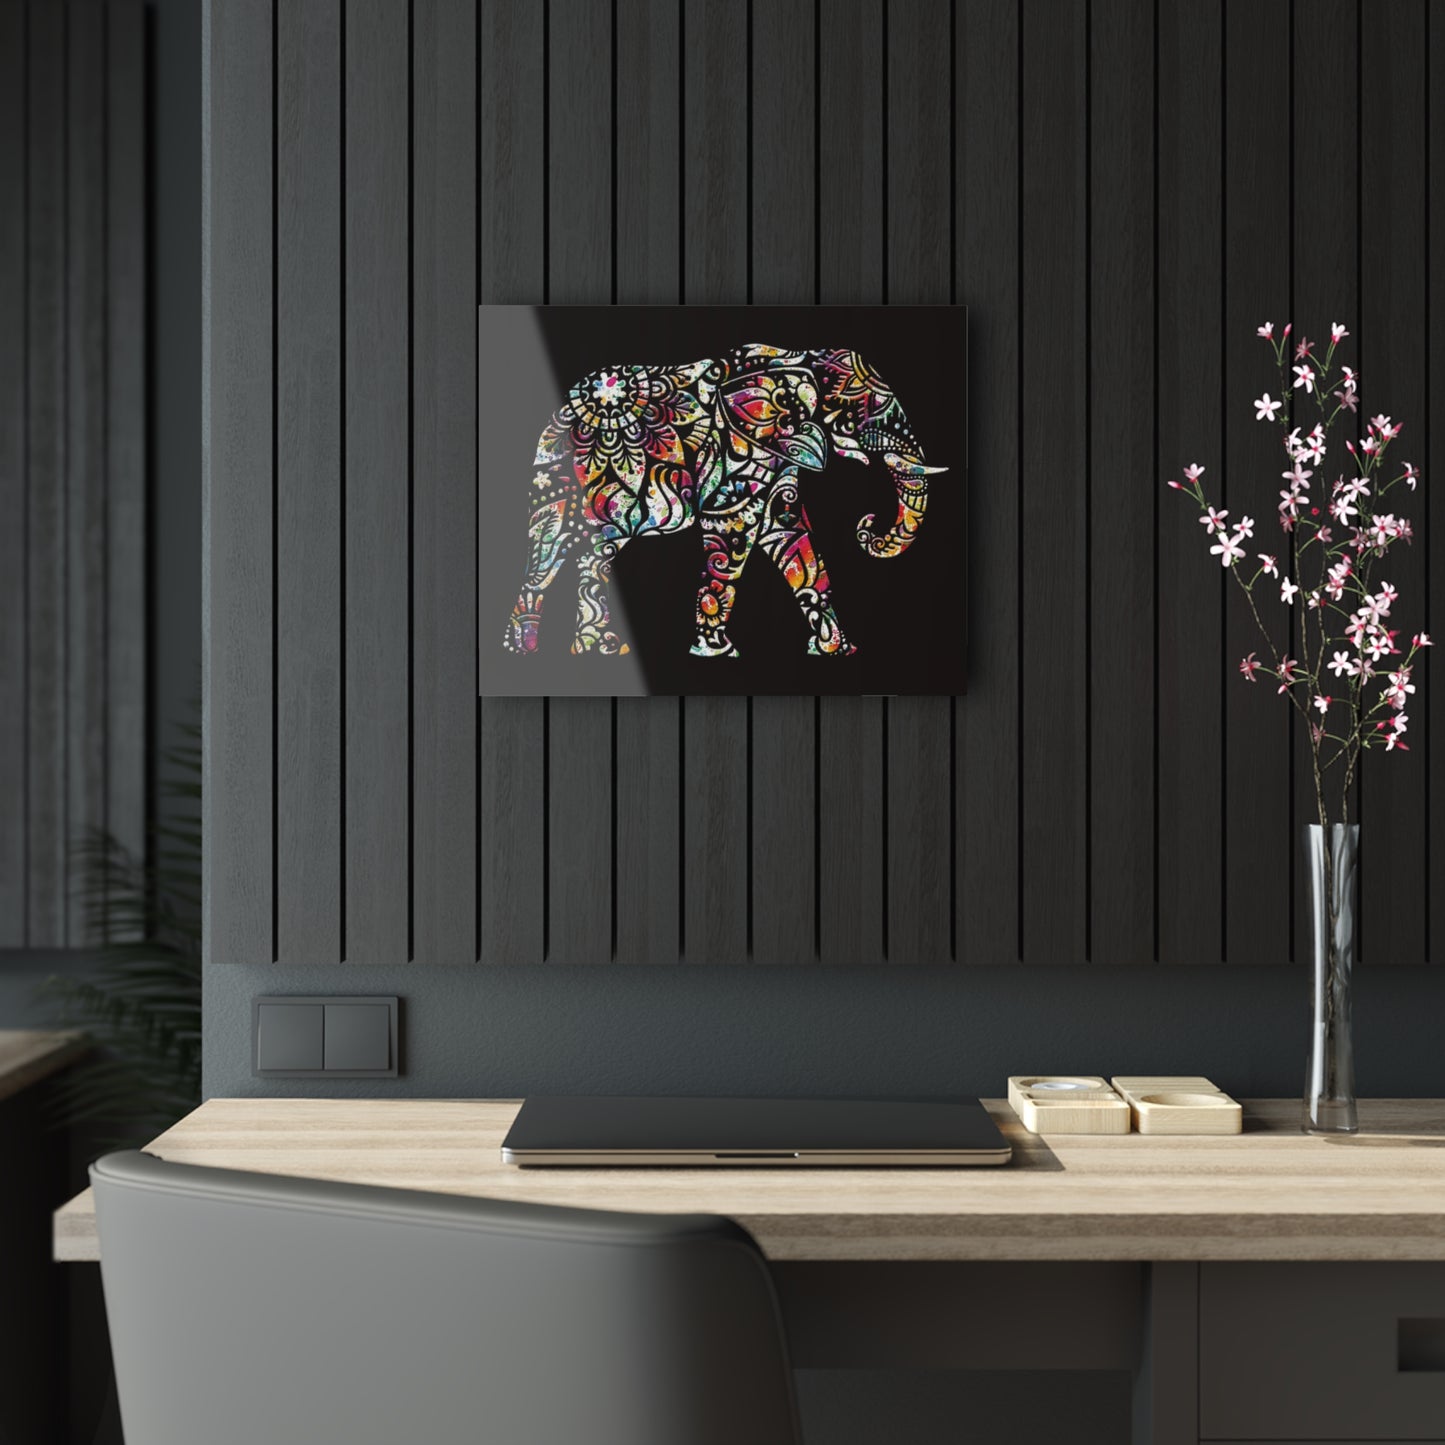 Elephant Themed Wall Art - Multicolor Indian Elephant on Black Background Printed on a Crystal Clear Acrylic Panel 20x16 hung on dark wall